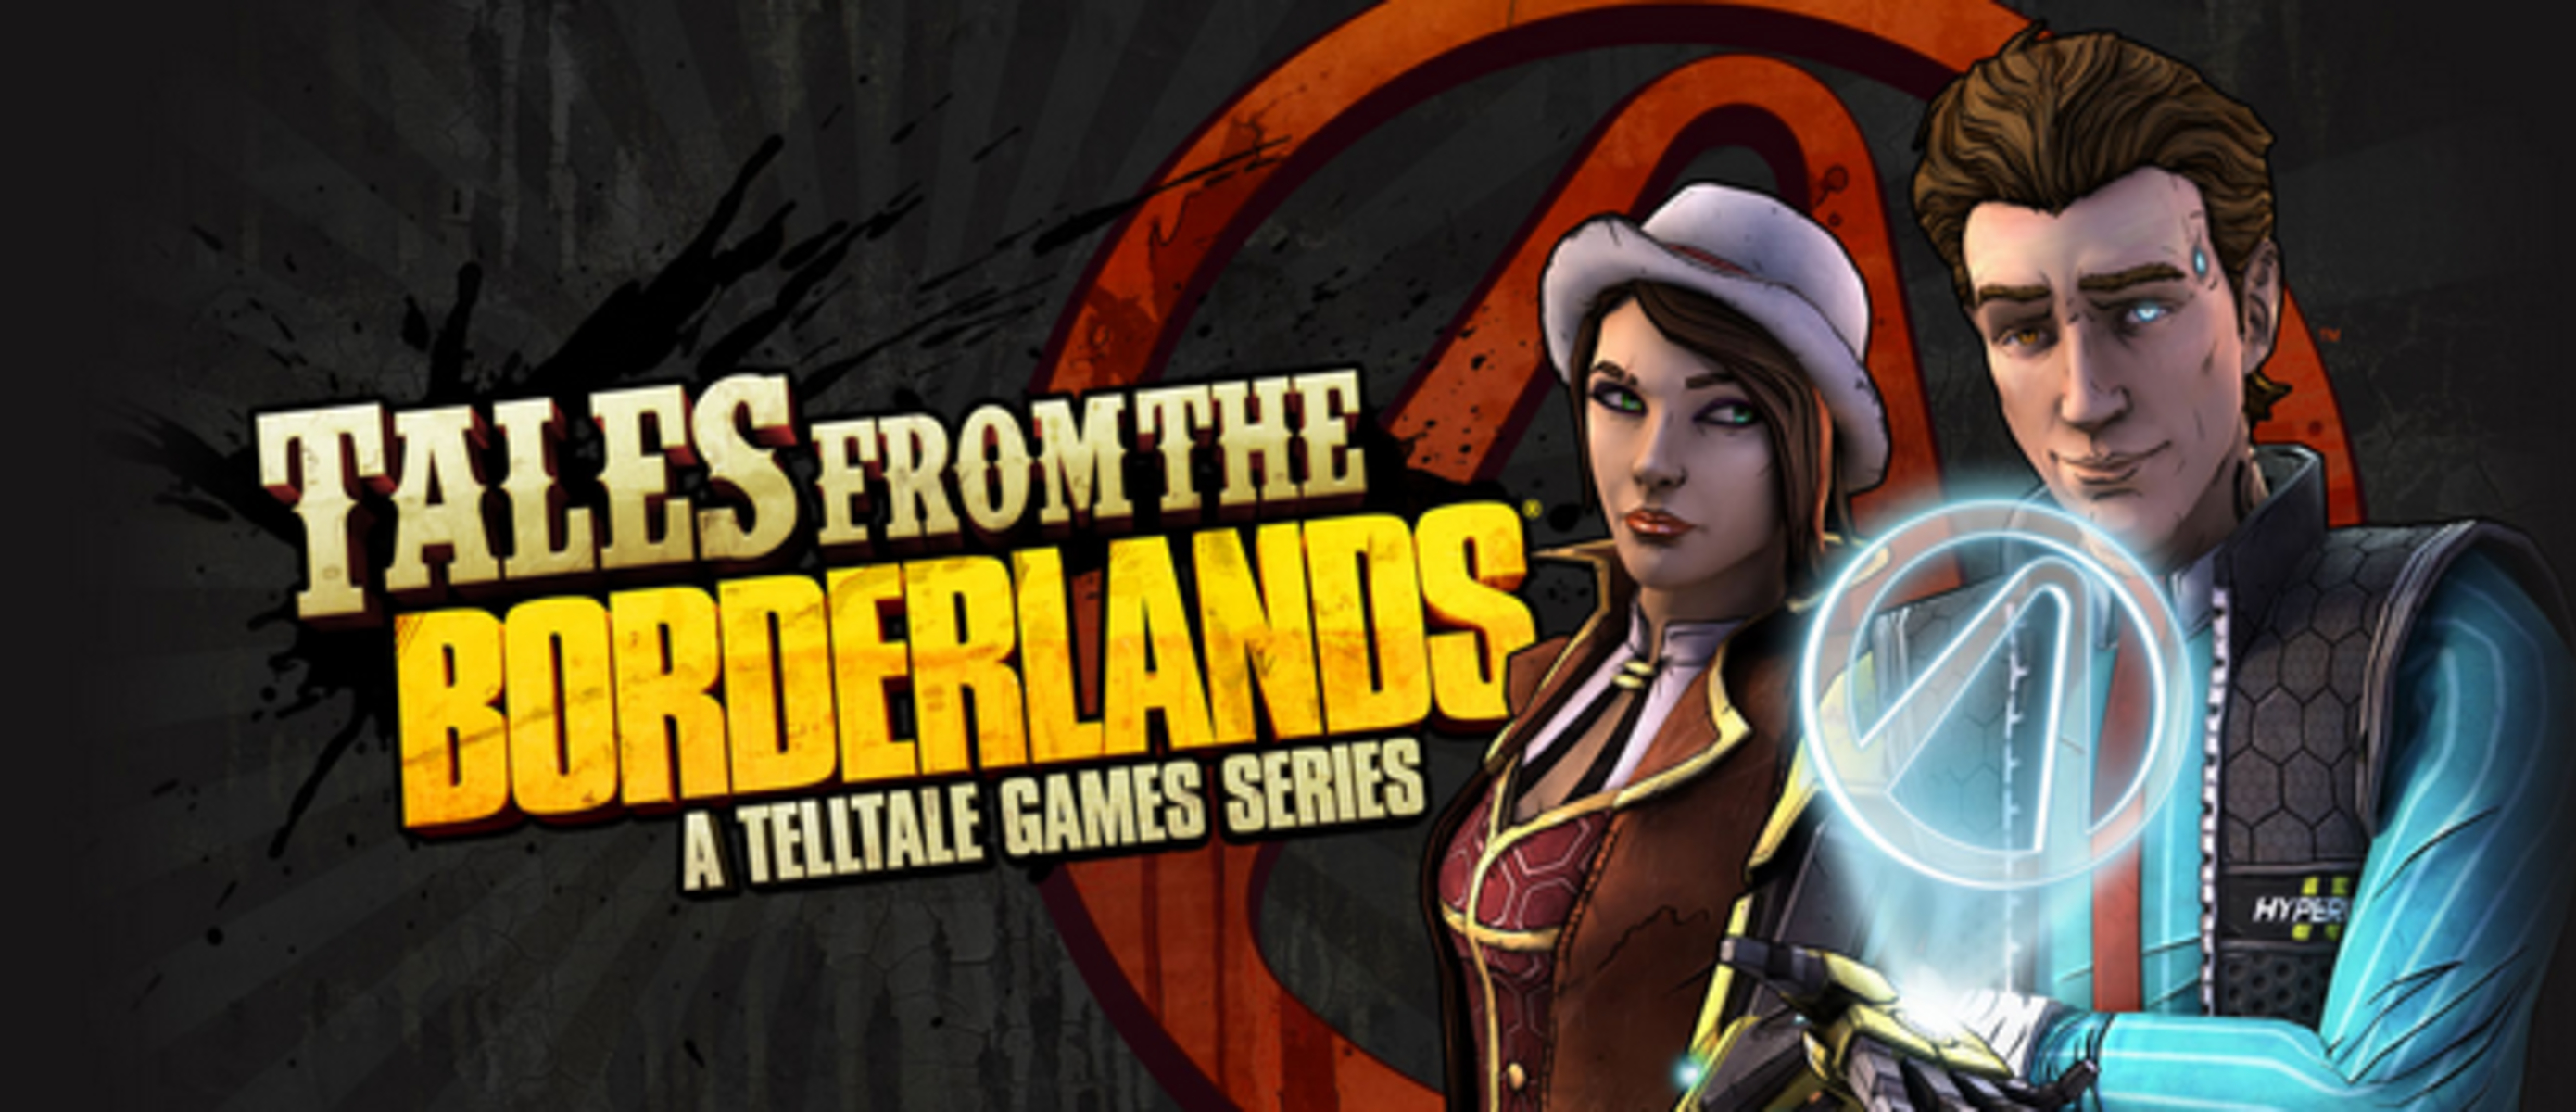 Игра красавчик. Tales from the Borderlands Постер. Tales from the Borderlands обои. Tales from the Borderlands 2014. New Tales from the Borderlands обложка.